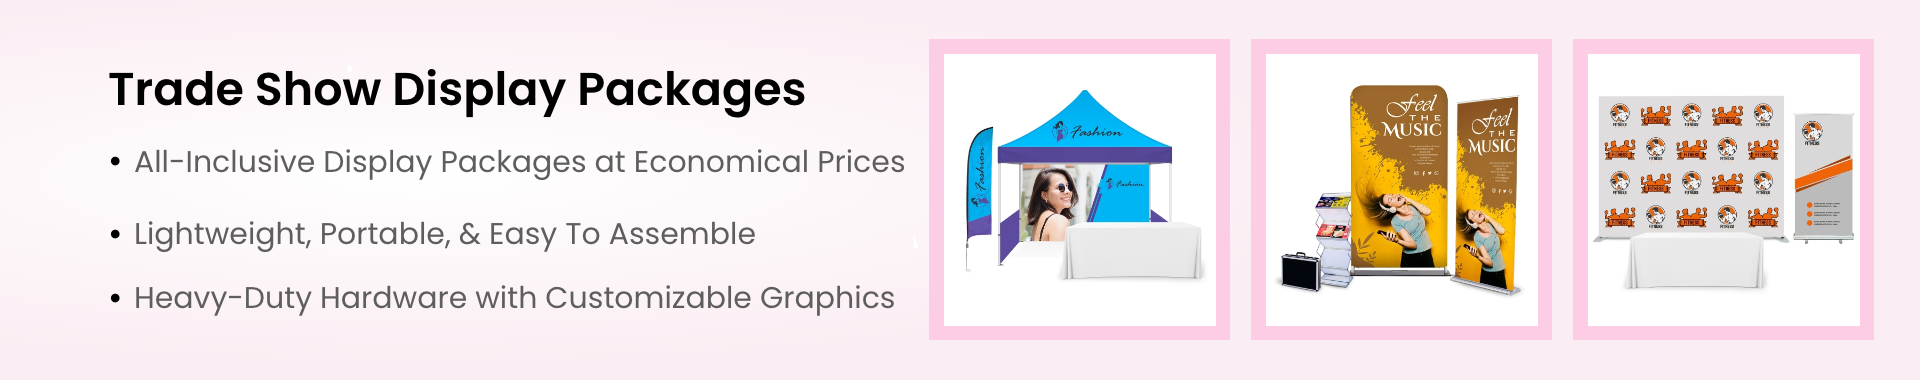 Category Trade Show Display Packages BOS